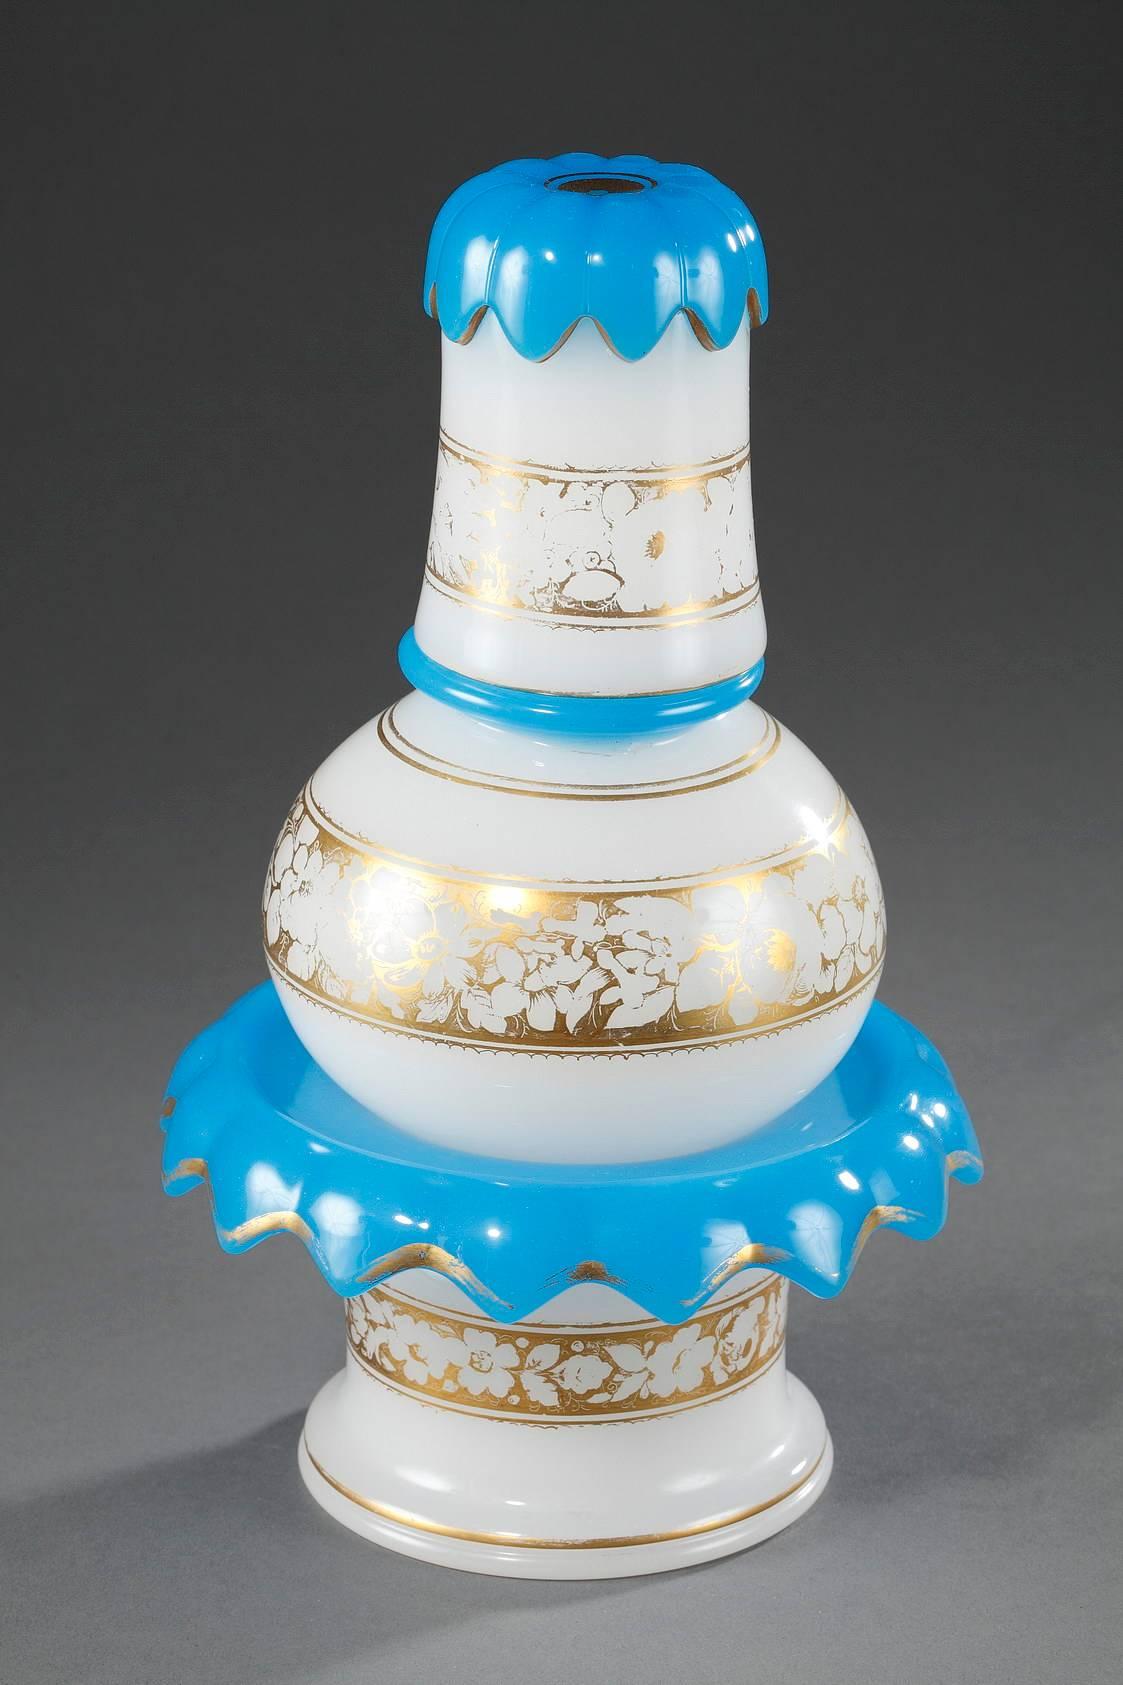 19th century white and blue opaline set composed of a water glass, a bottle-shaped flask, and a spittoon that forms the base. The three pieces are decorated with gilded friezes of flowers and stripes. Saint-Louis Glassworks. 

circa